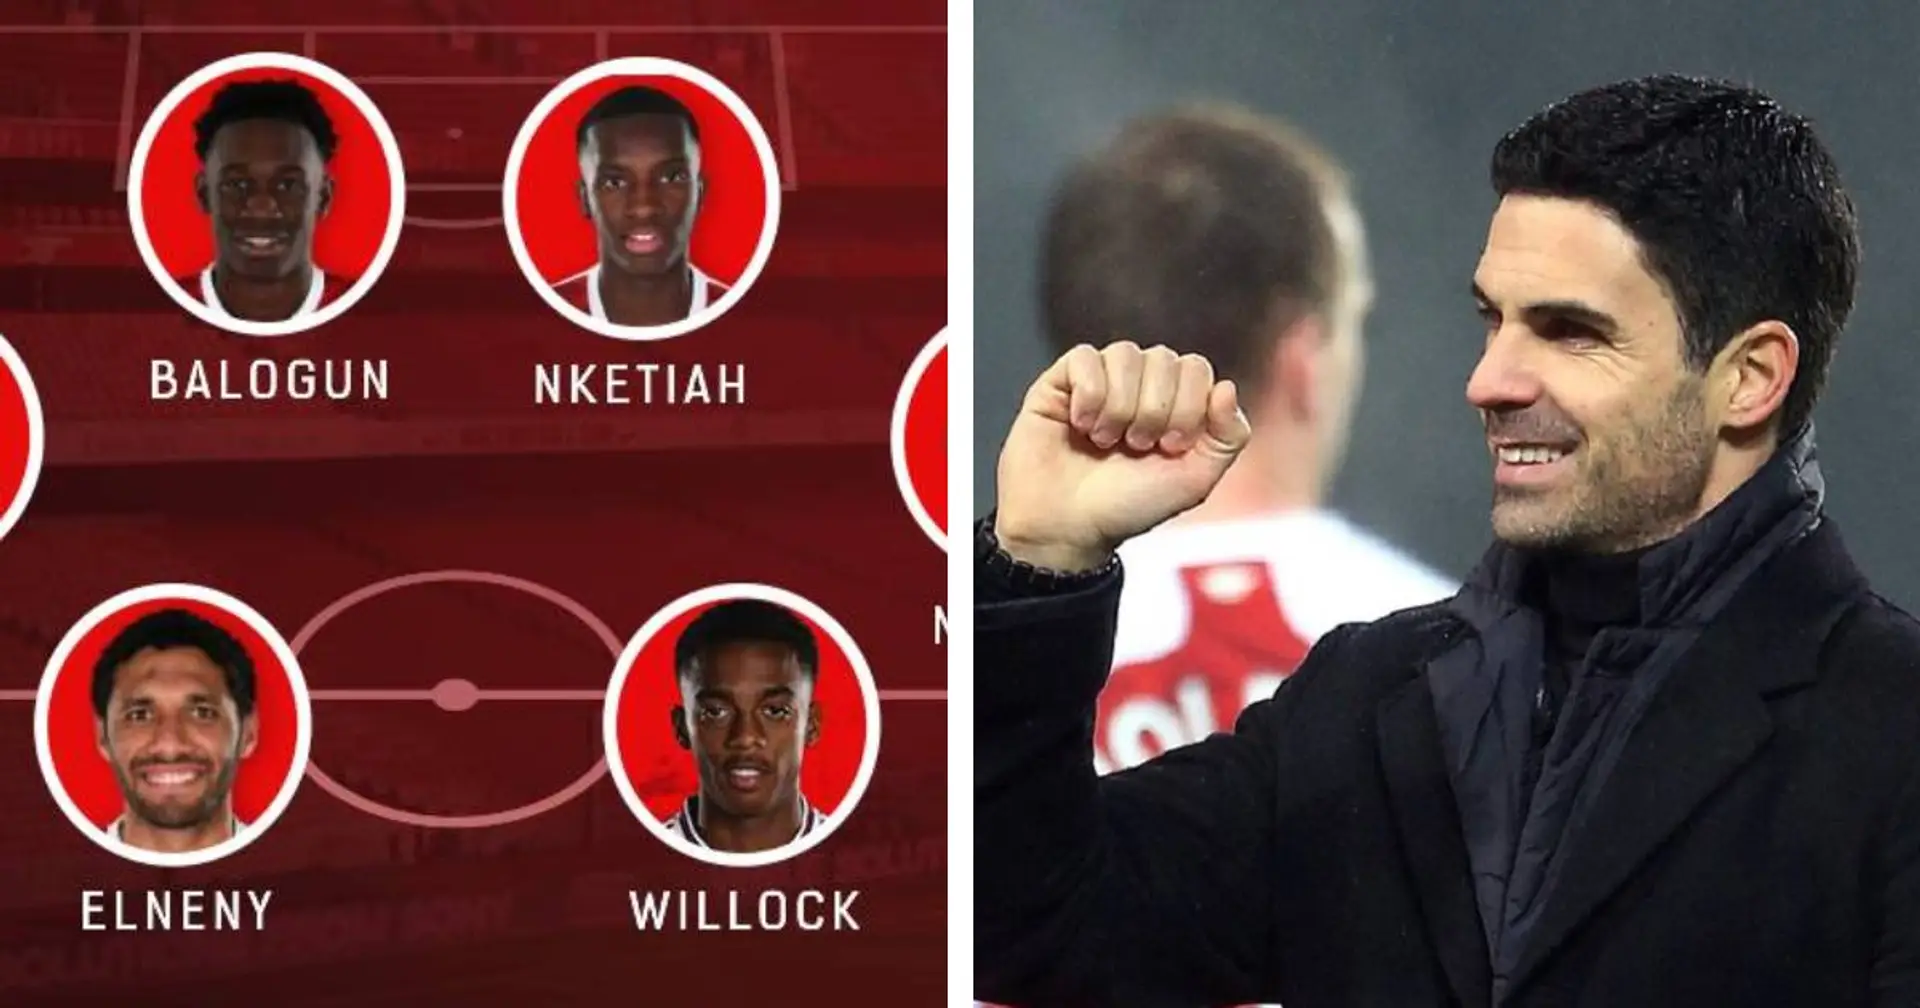 Last chance saloon for some? Select your XI to face Newcastle from 2 options!